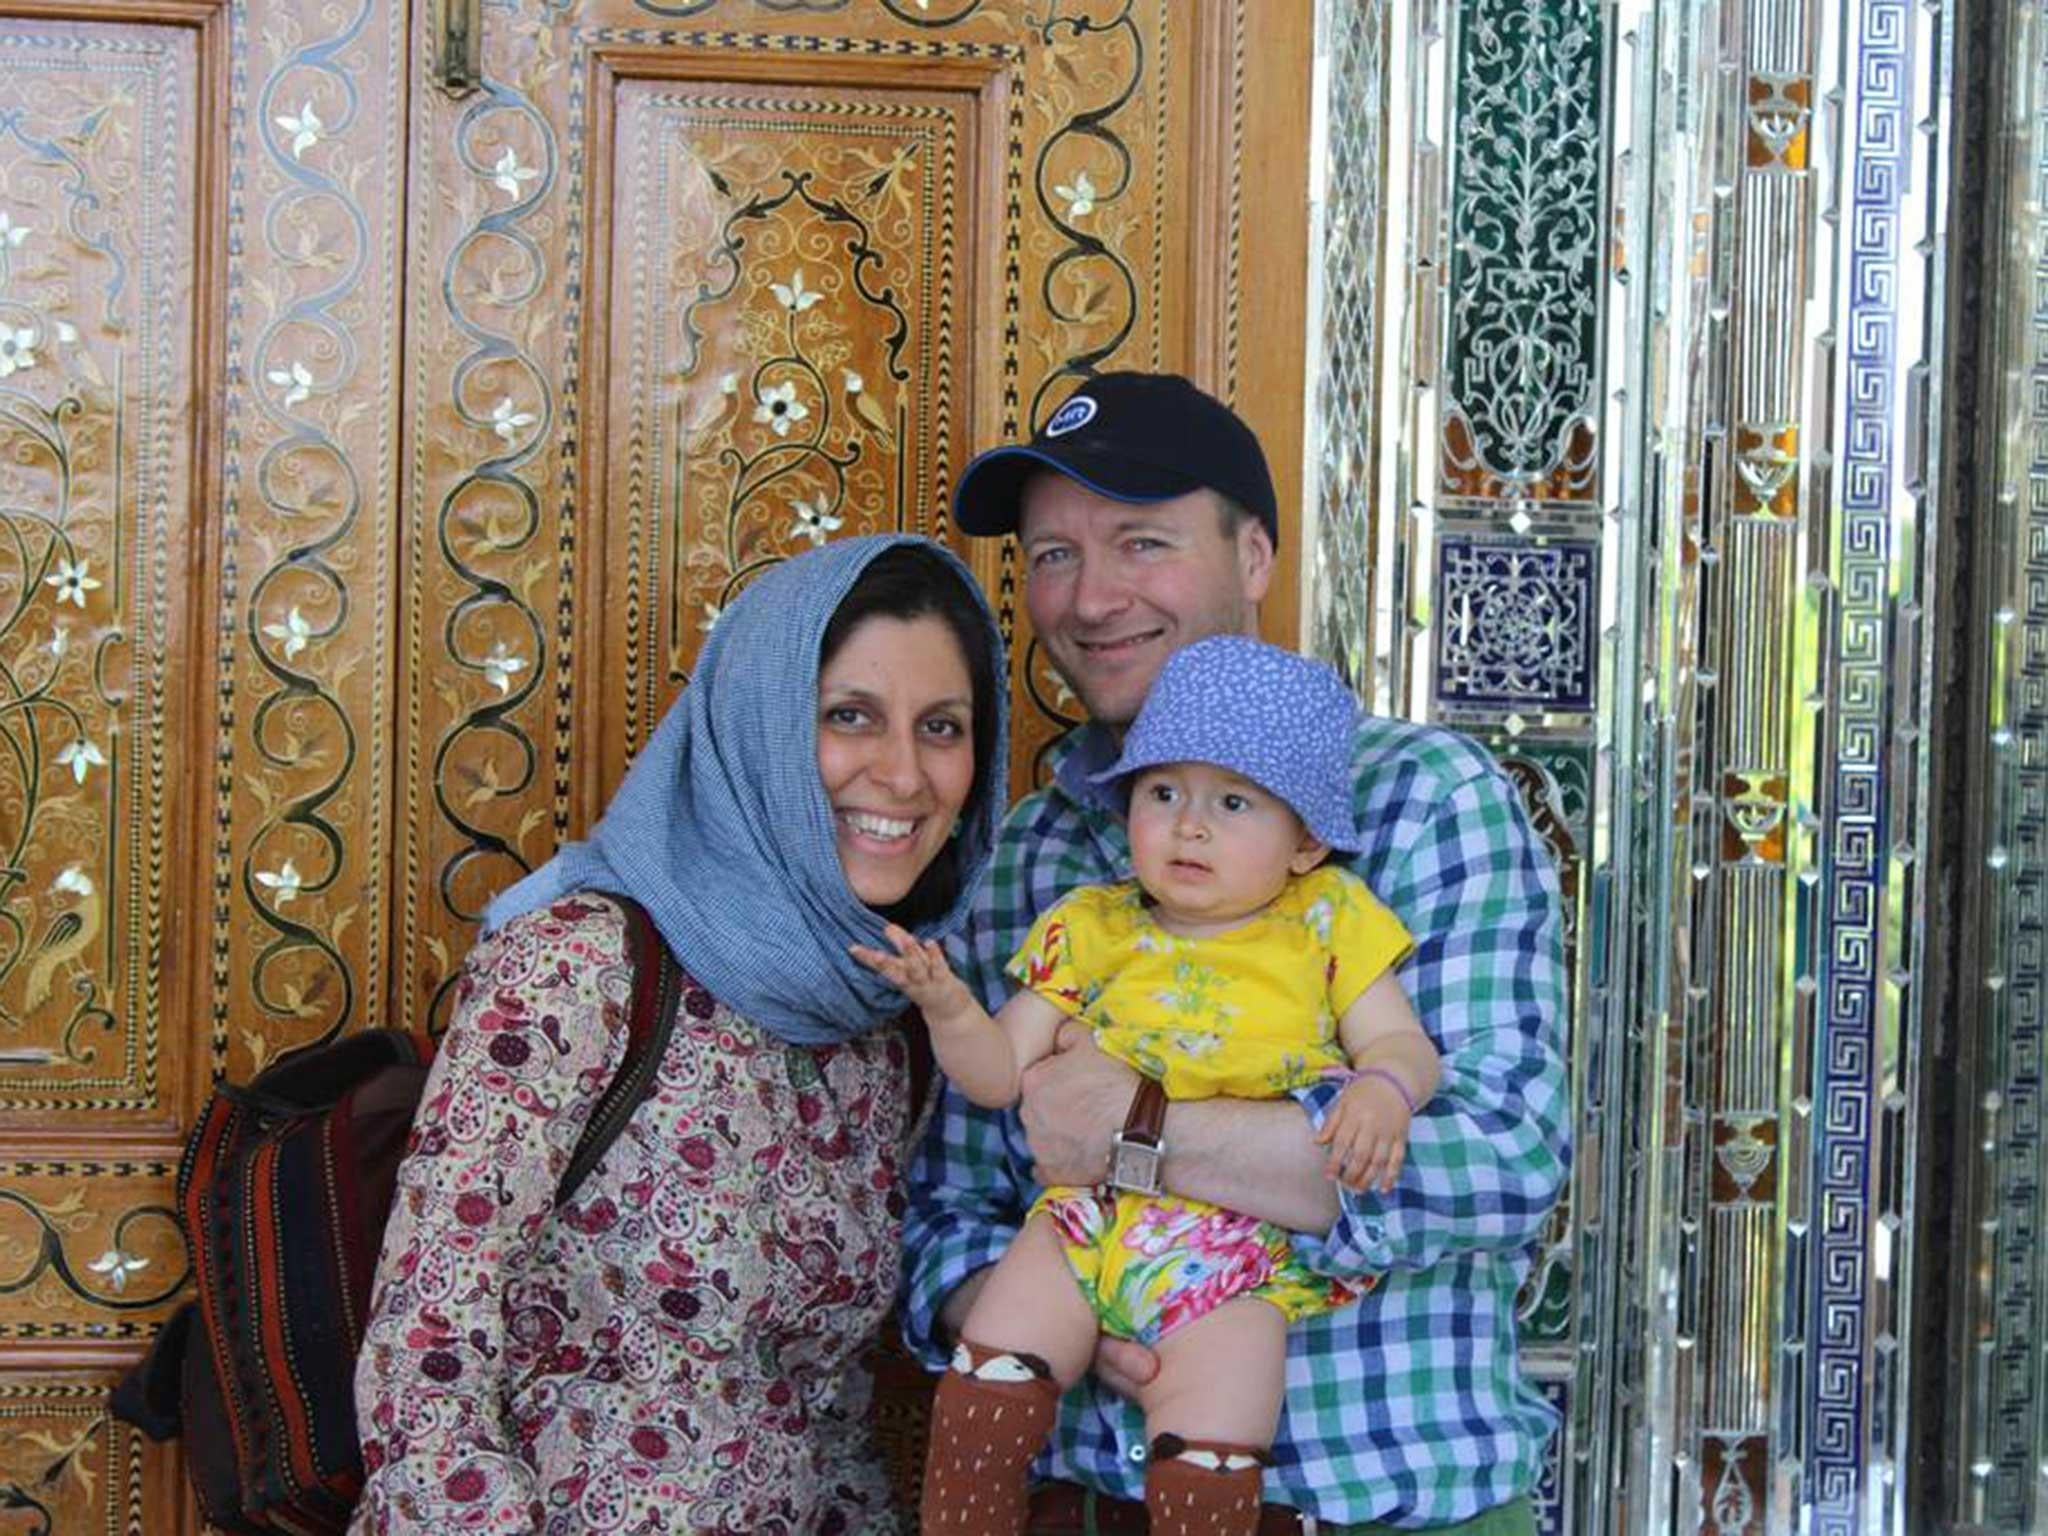 ‘If Nazanin can say that on the inside, then I have to keep going on the outside’